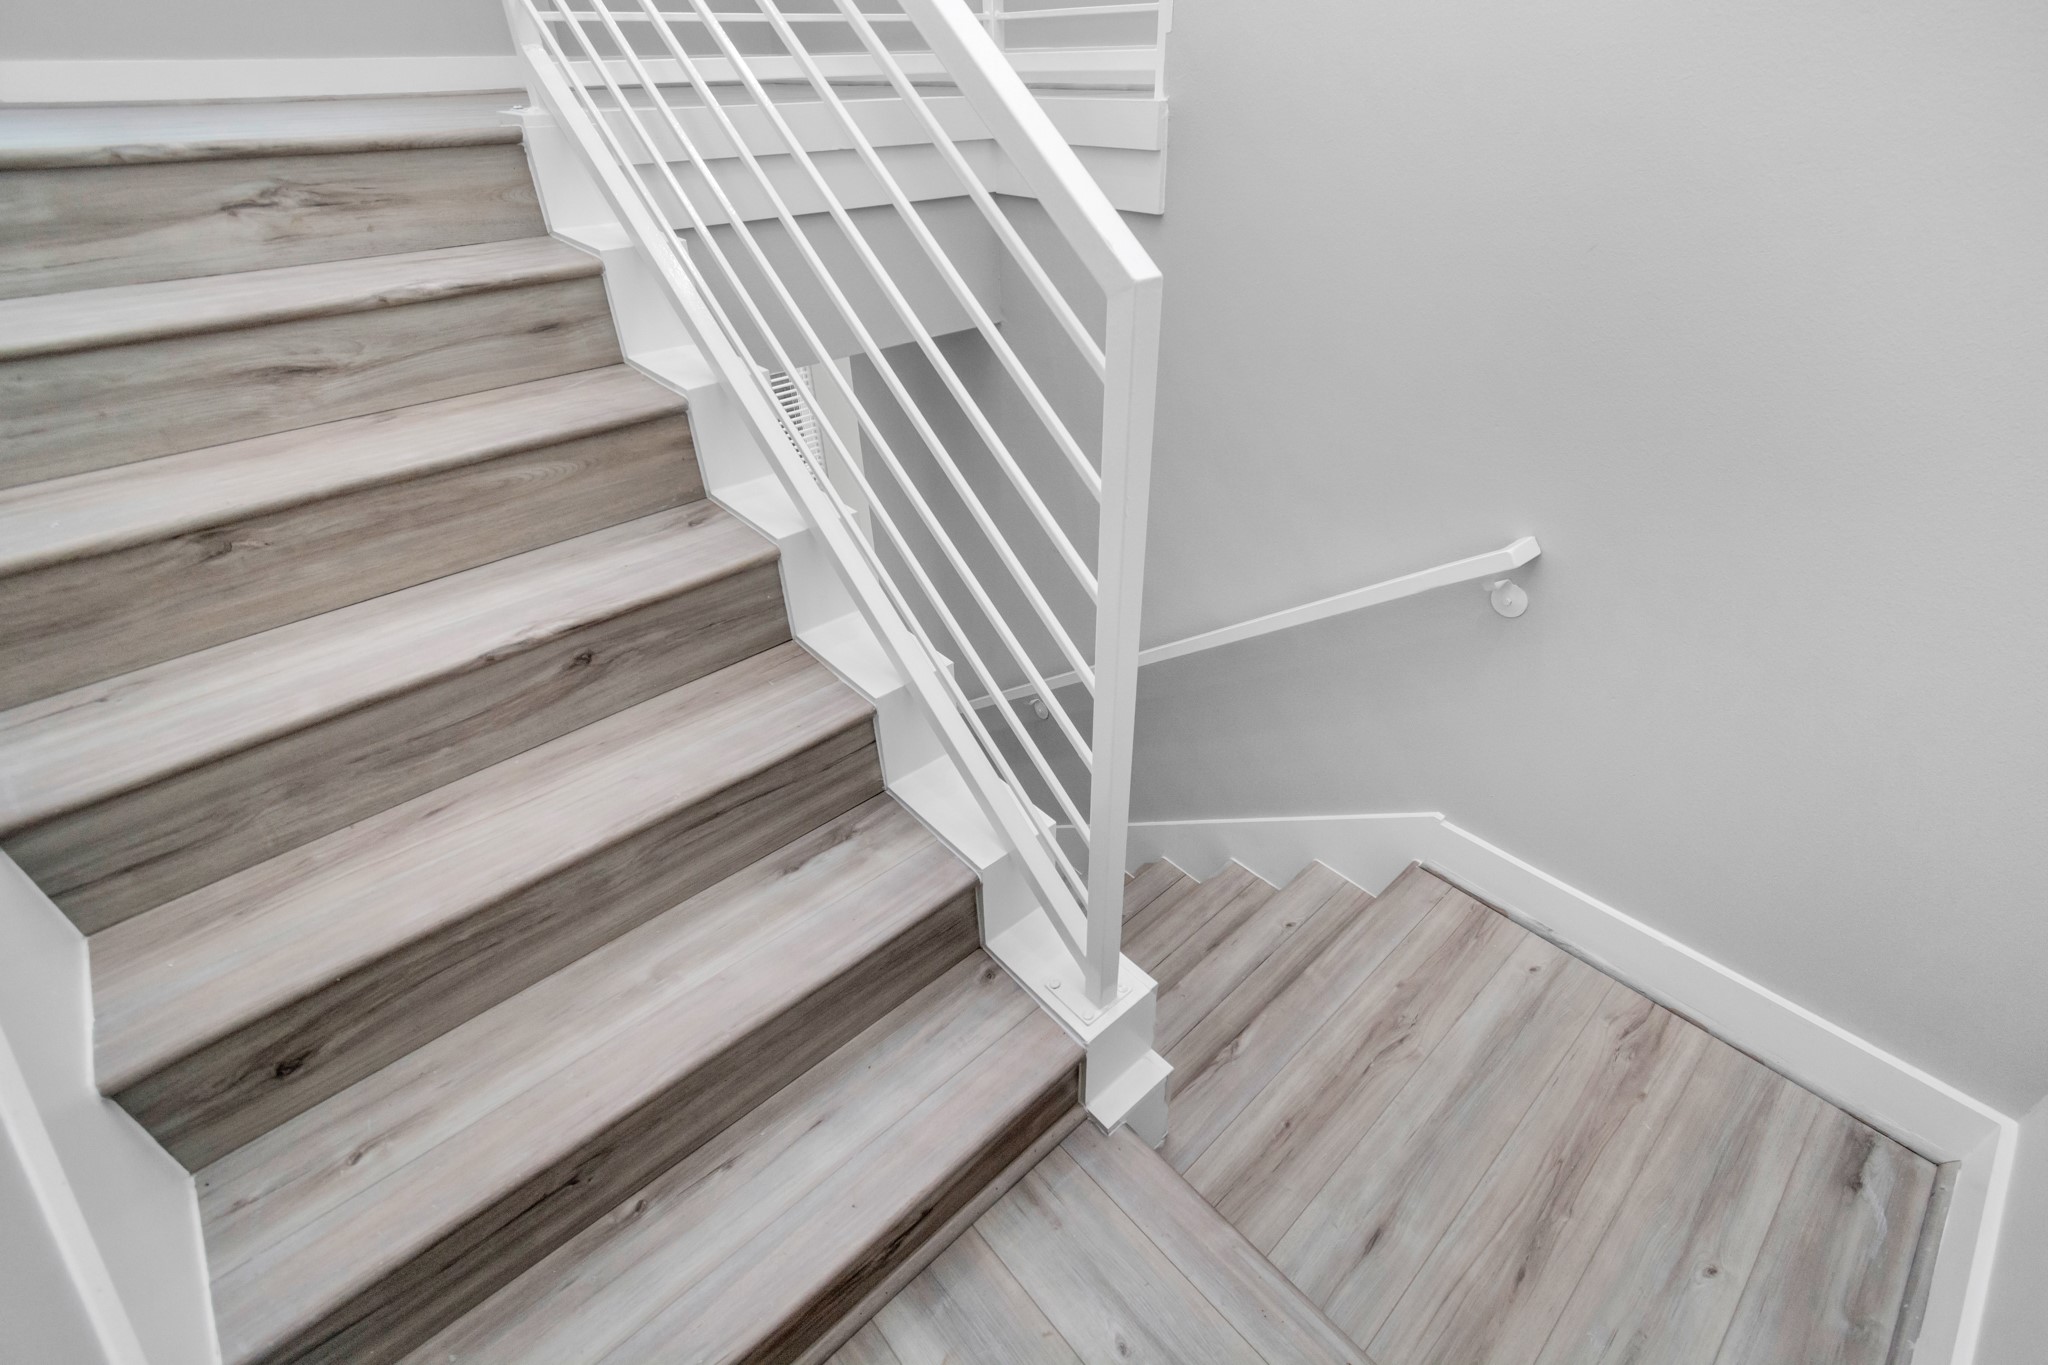 Heading upstairs, you will find the LVP Flooring flows up the stairs and onto the secondary floor.